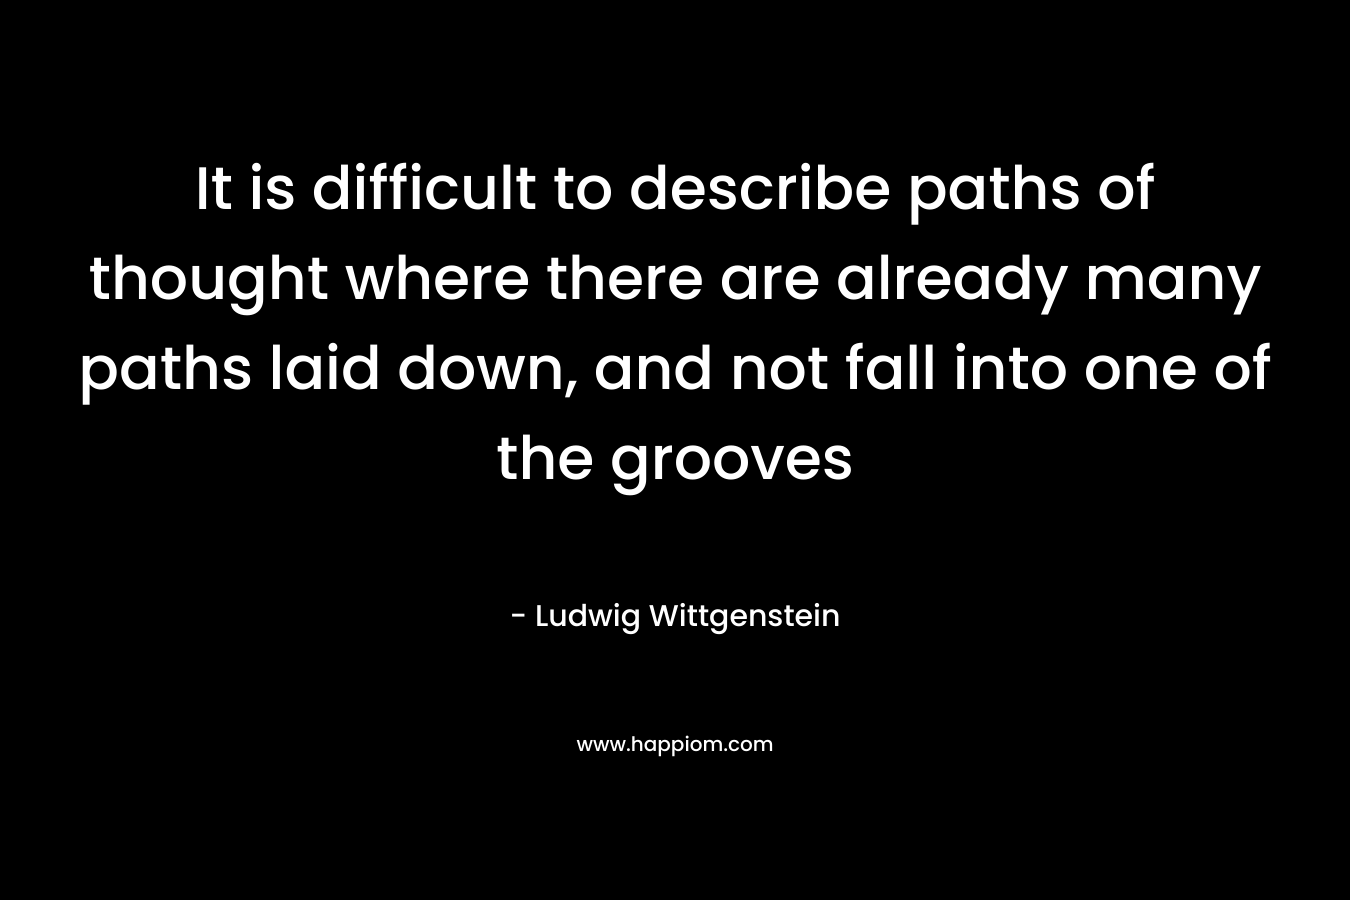 It is difficult to describe paths of thought where there are already many paths laid down, and not fall into one of the grooves – Ludwig Wittgenstein